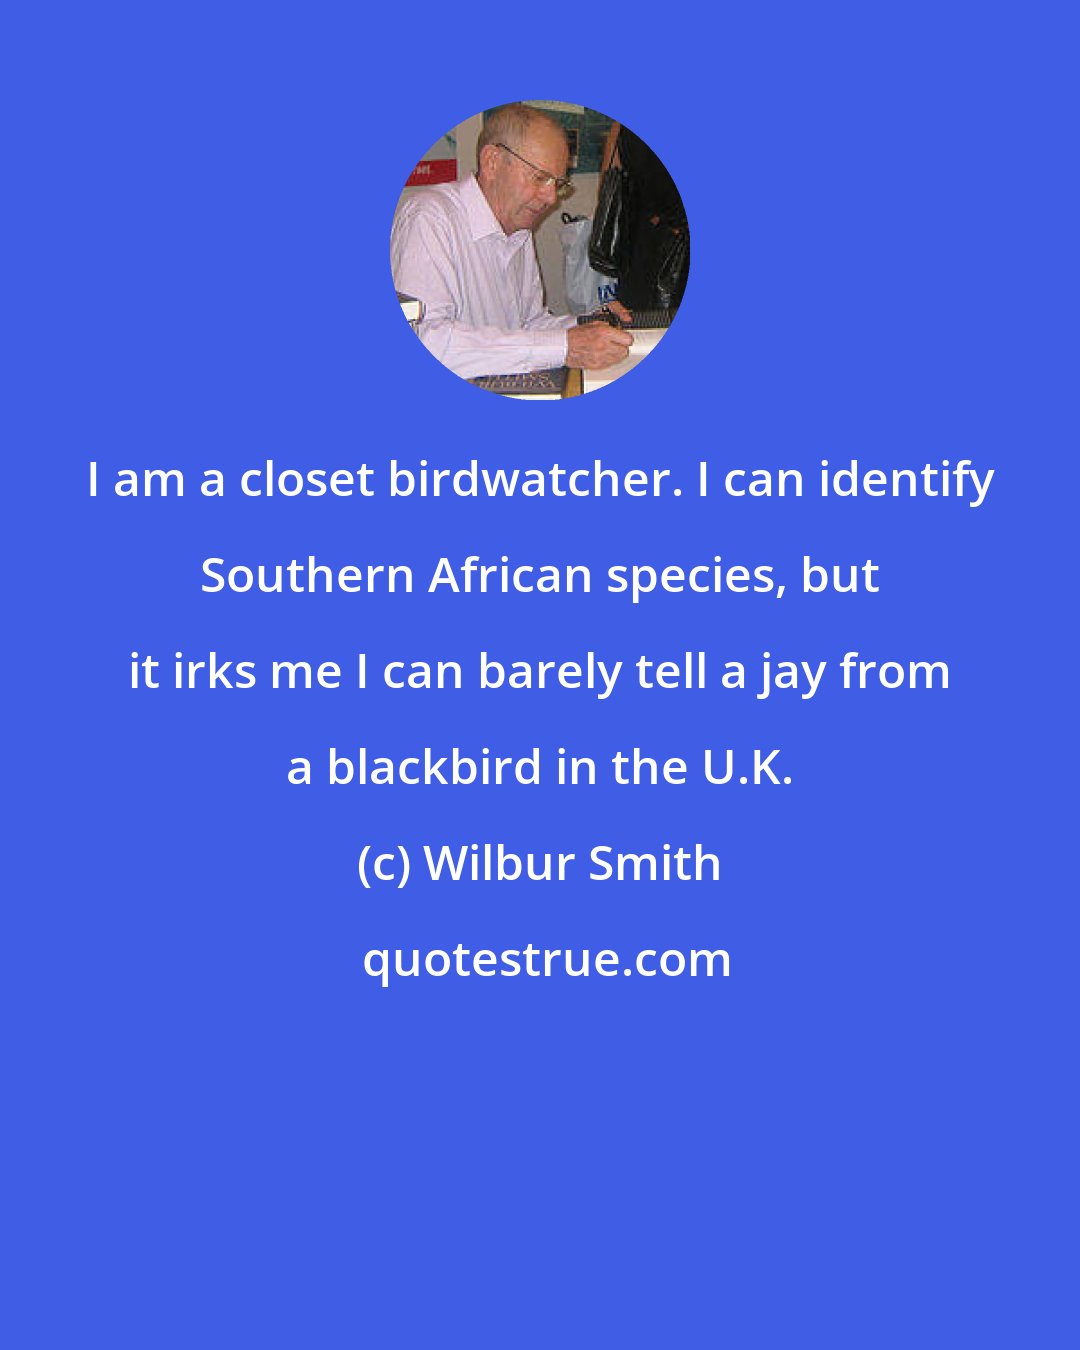 Wilbur Smith: I am a closet birdwatcher. I can identify Southern African species, but it irks me I can barely tell a jay from a blackbird in the U.K.